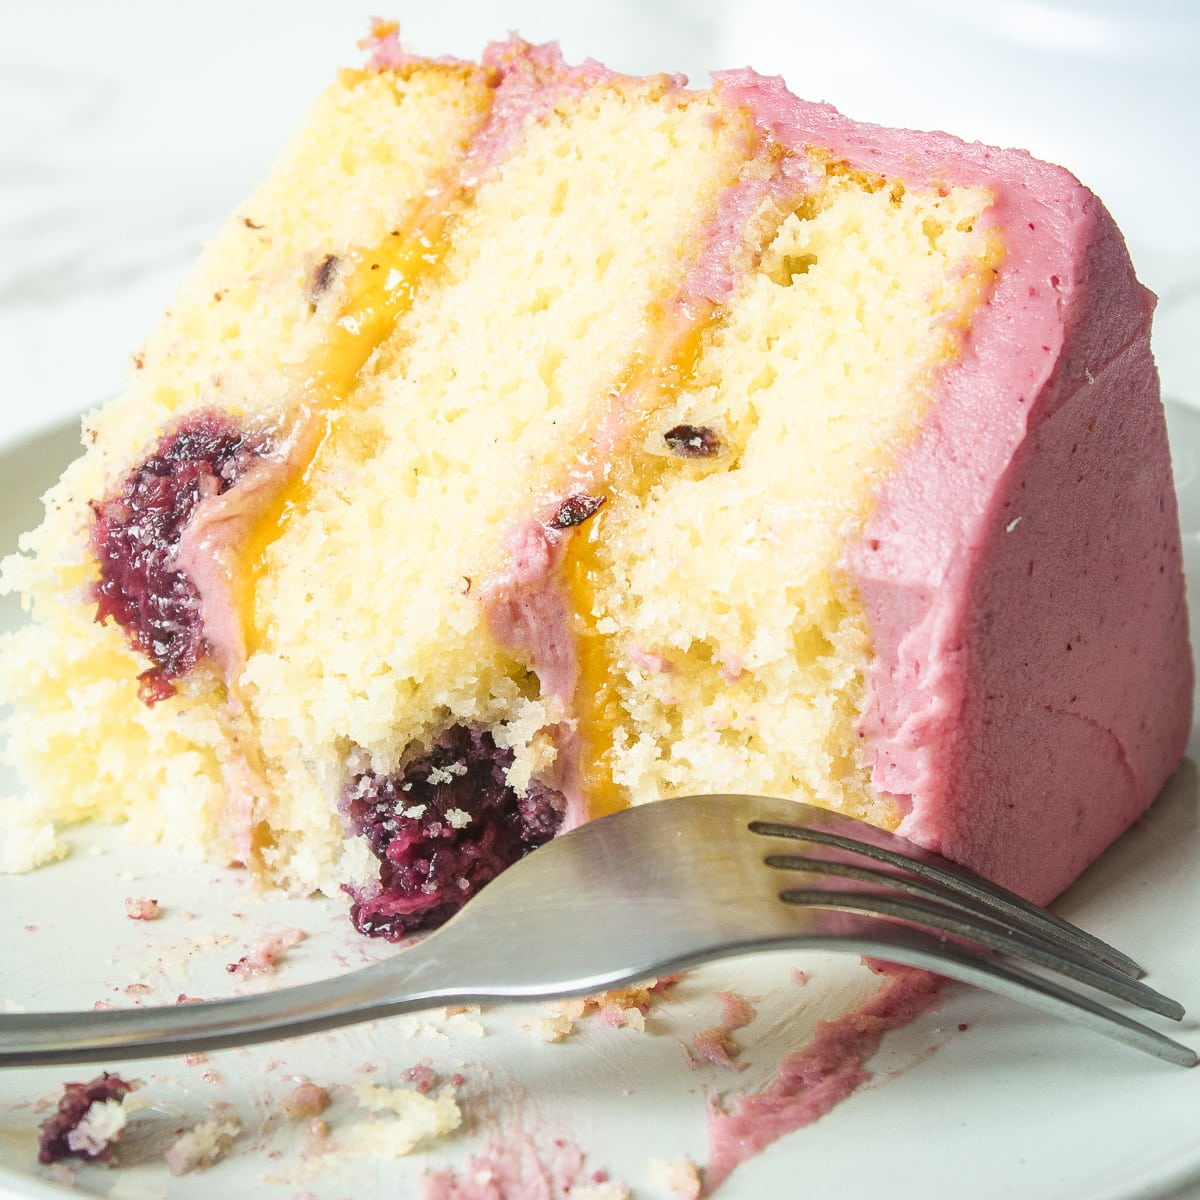 Lemon and Blackberry Cake with Lemon Curd Filling | Chenée Today